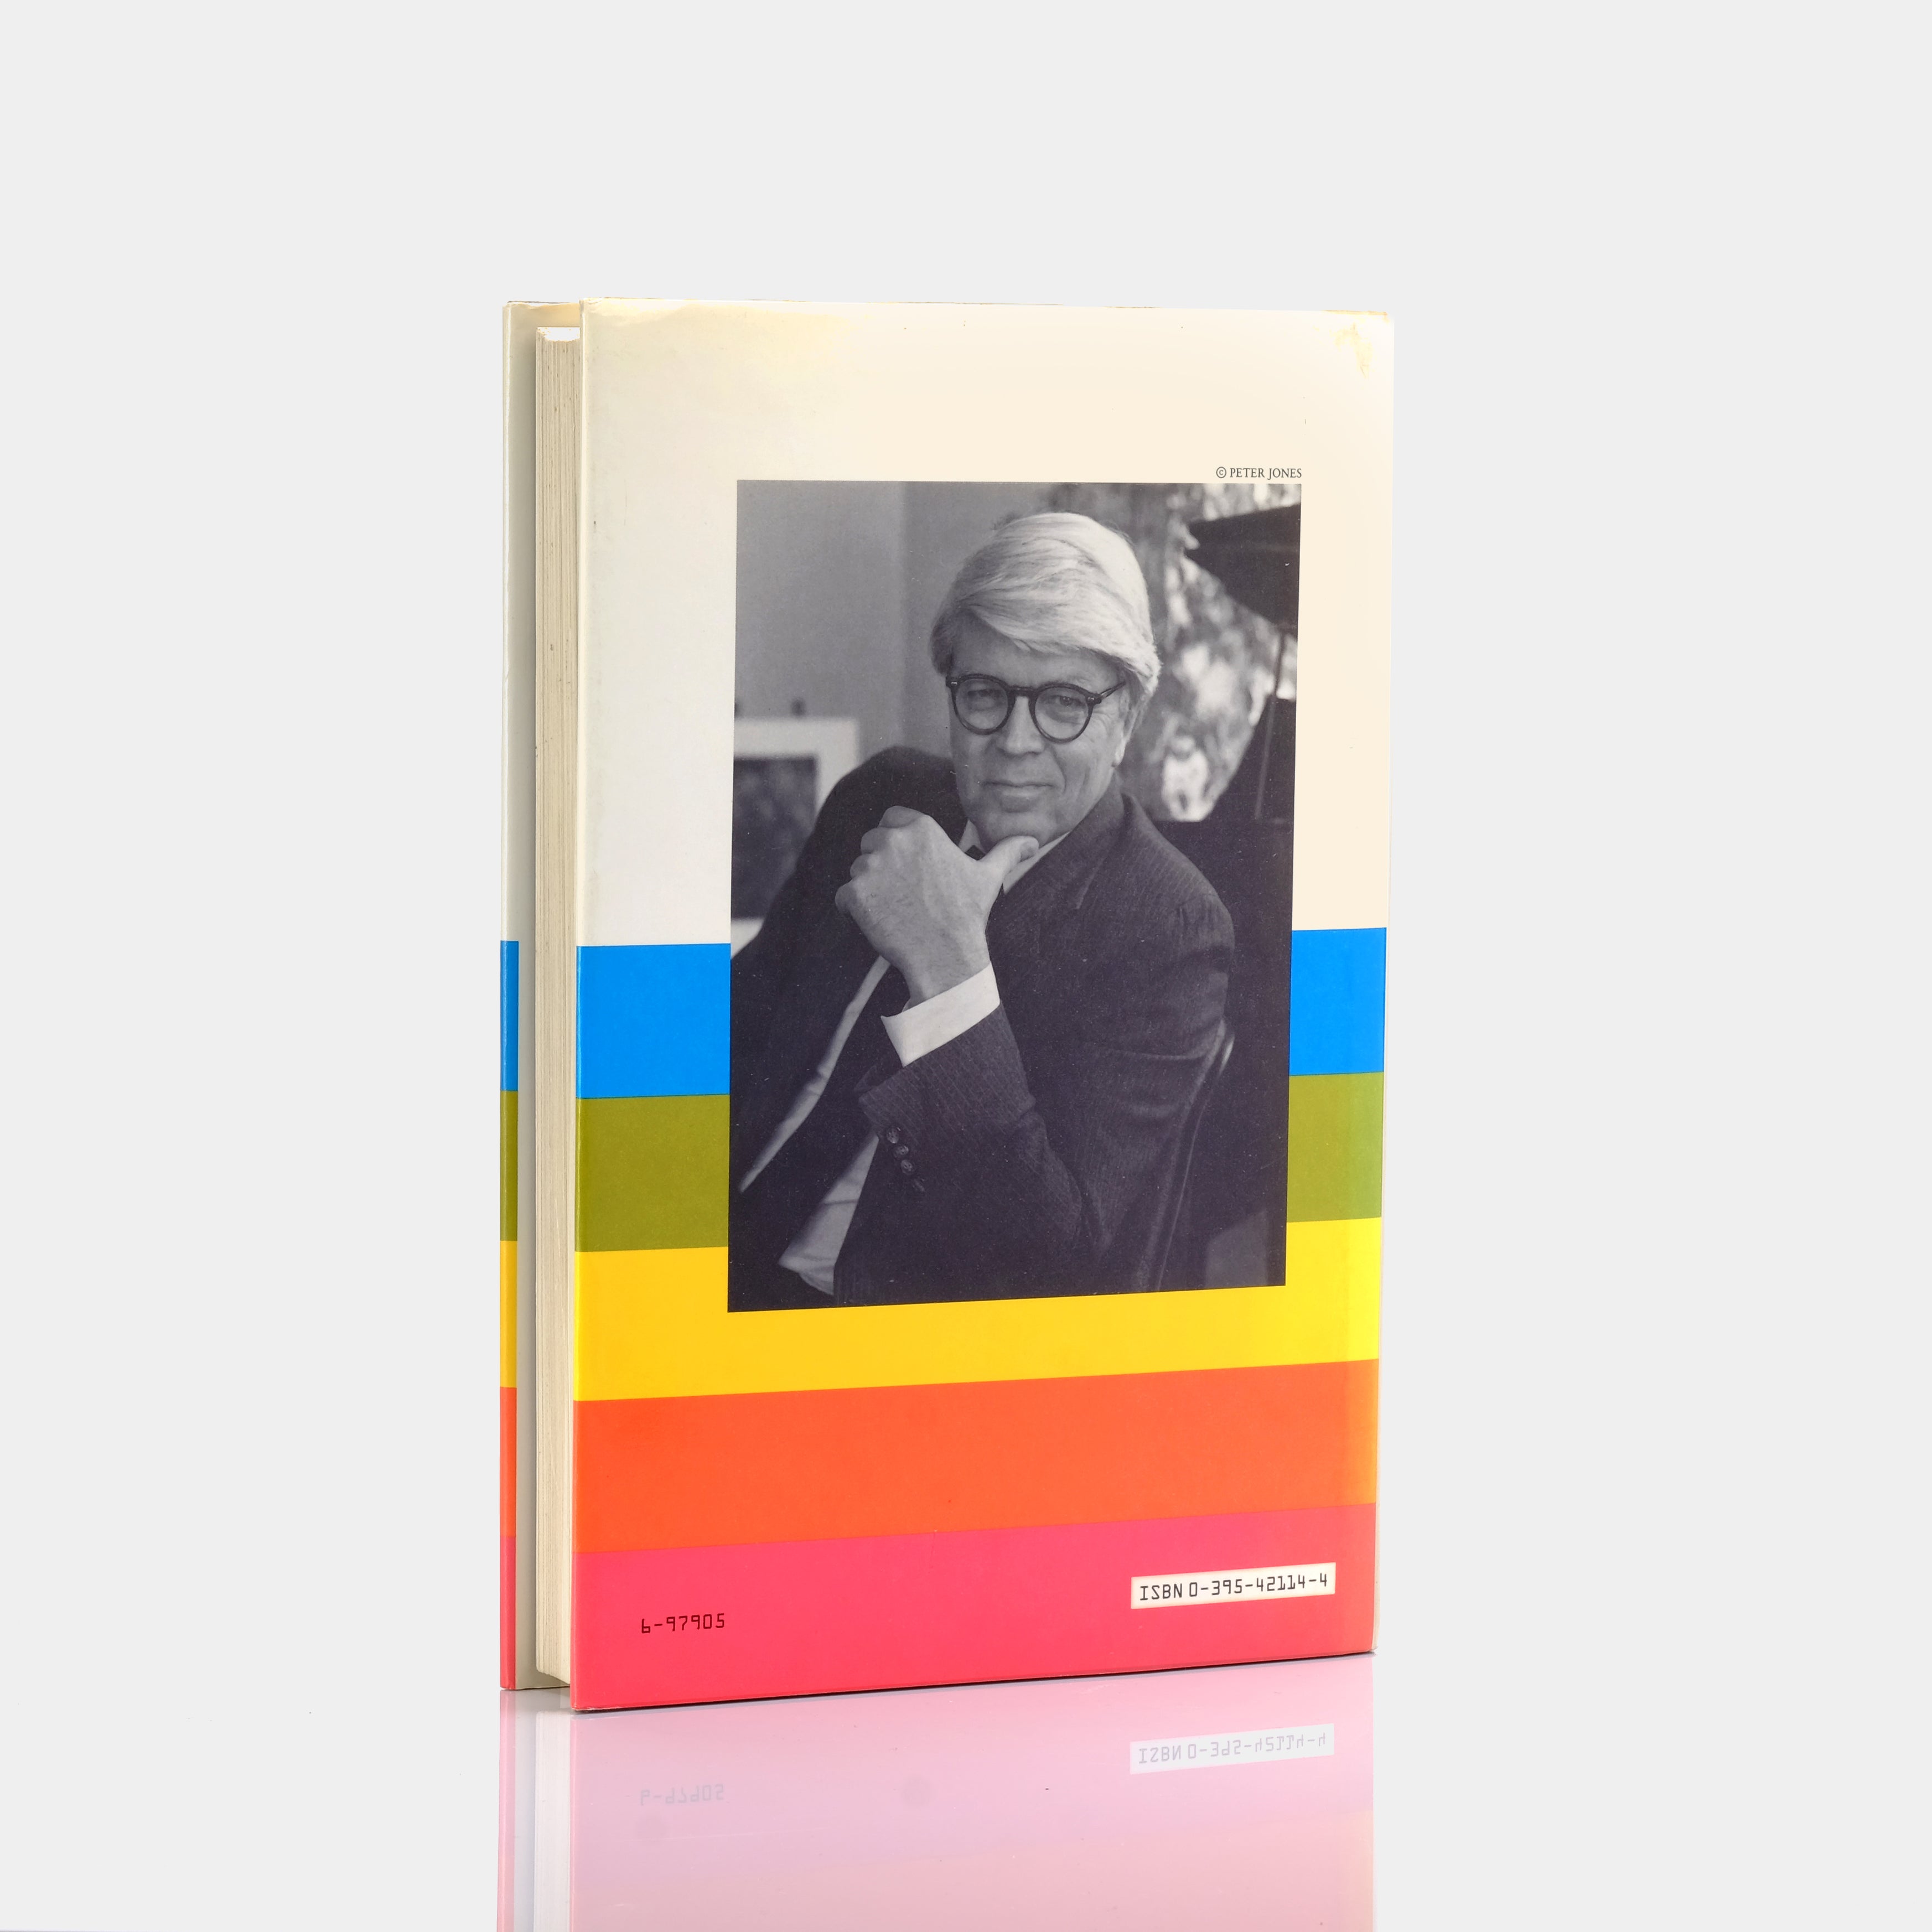 Land's Polaroid: A Company and the Man Who Invented It Book